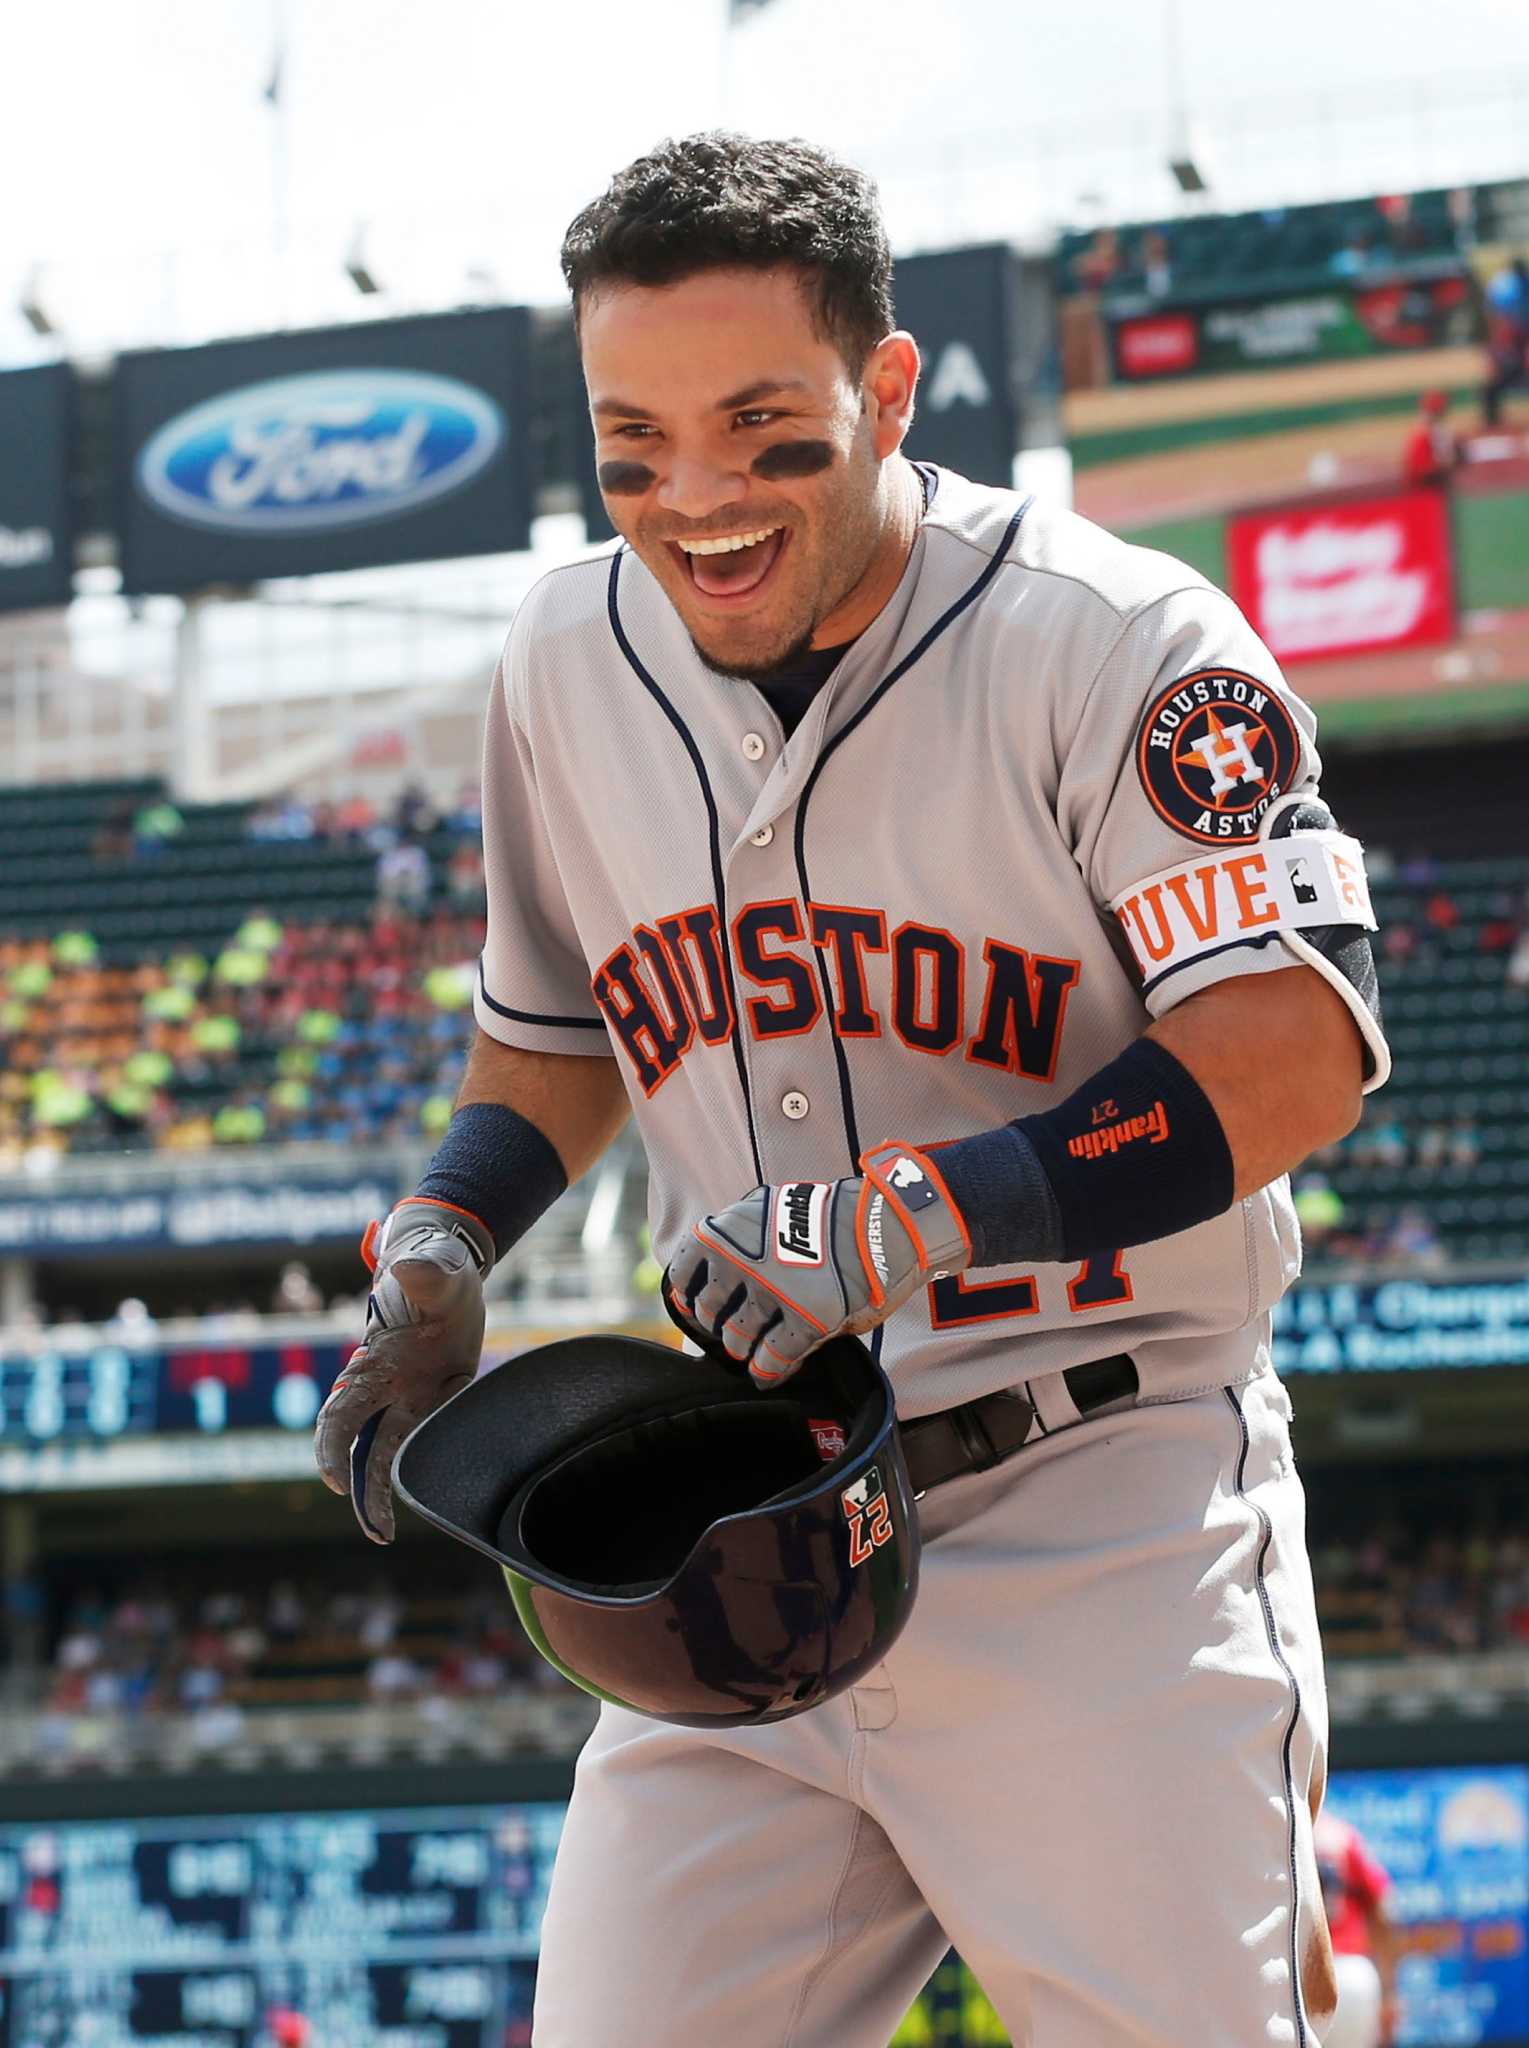 The Astros' Jose Altuve Reaches New Heights of Hitting - WSJ